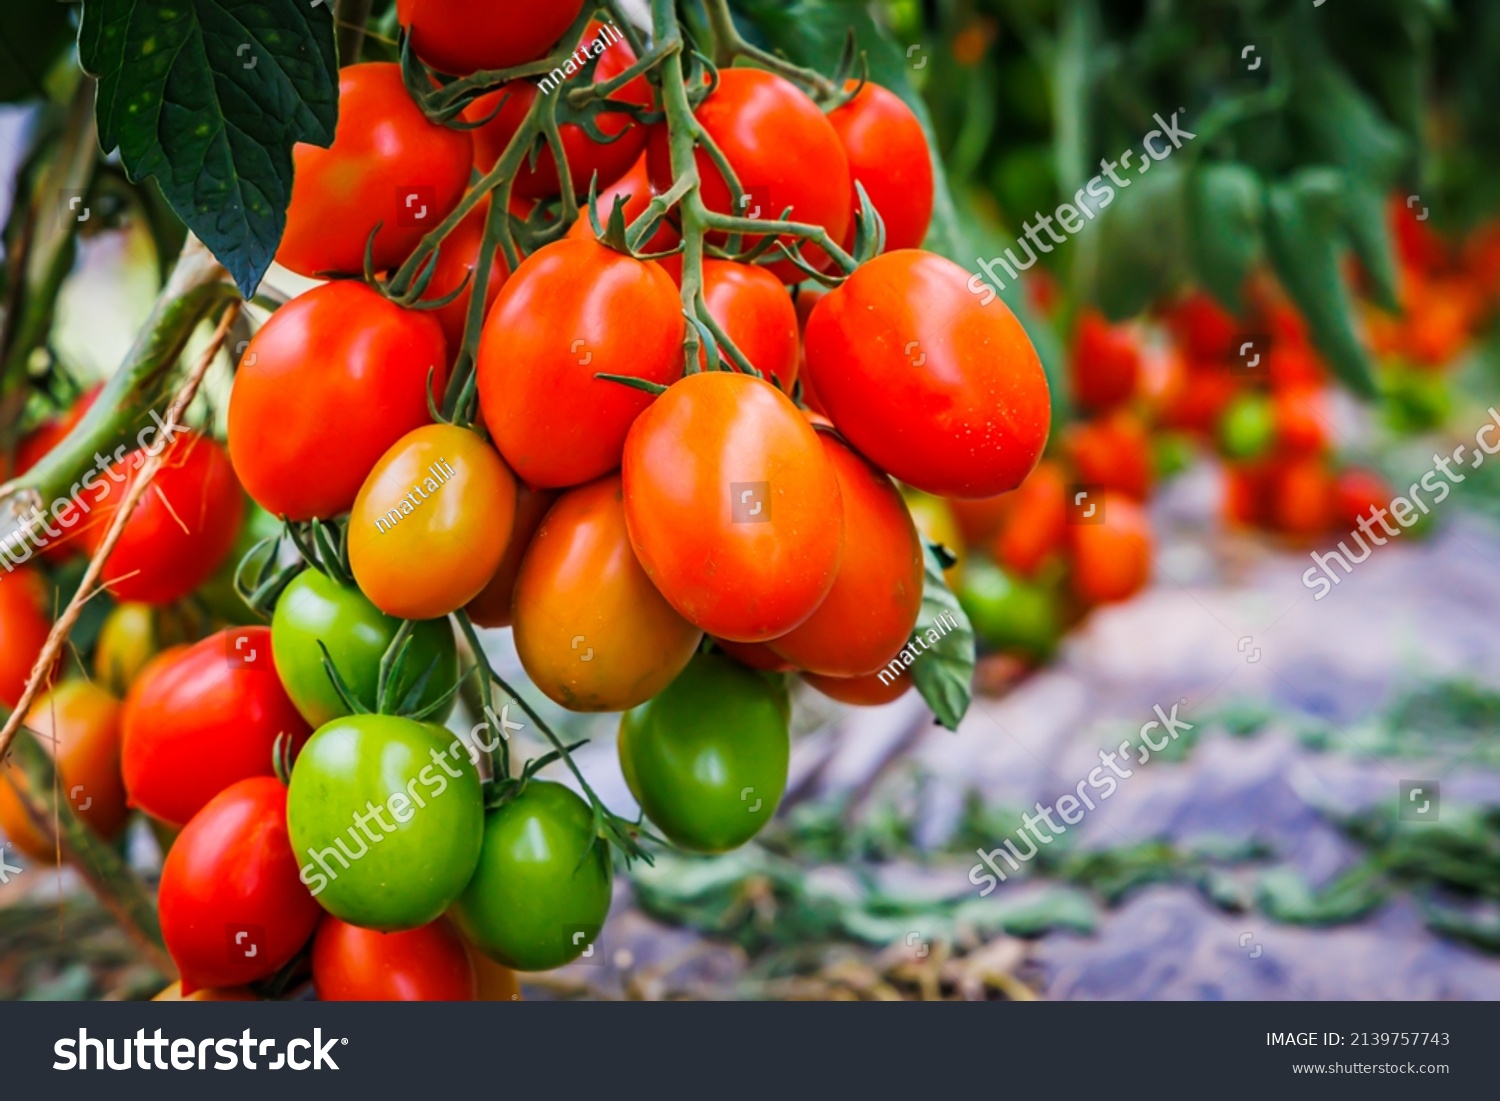 Many tomatoes on tomato tree in summer garden. Many Roma tomato plants in greenhouse with automatic irrigation watering system. Best Heirloom plum 
Tomato Varieties. Delicious Heirloom Tomatoes #2139757743